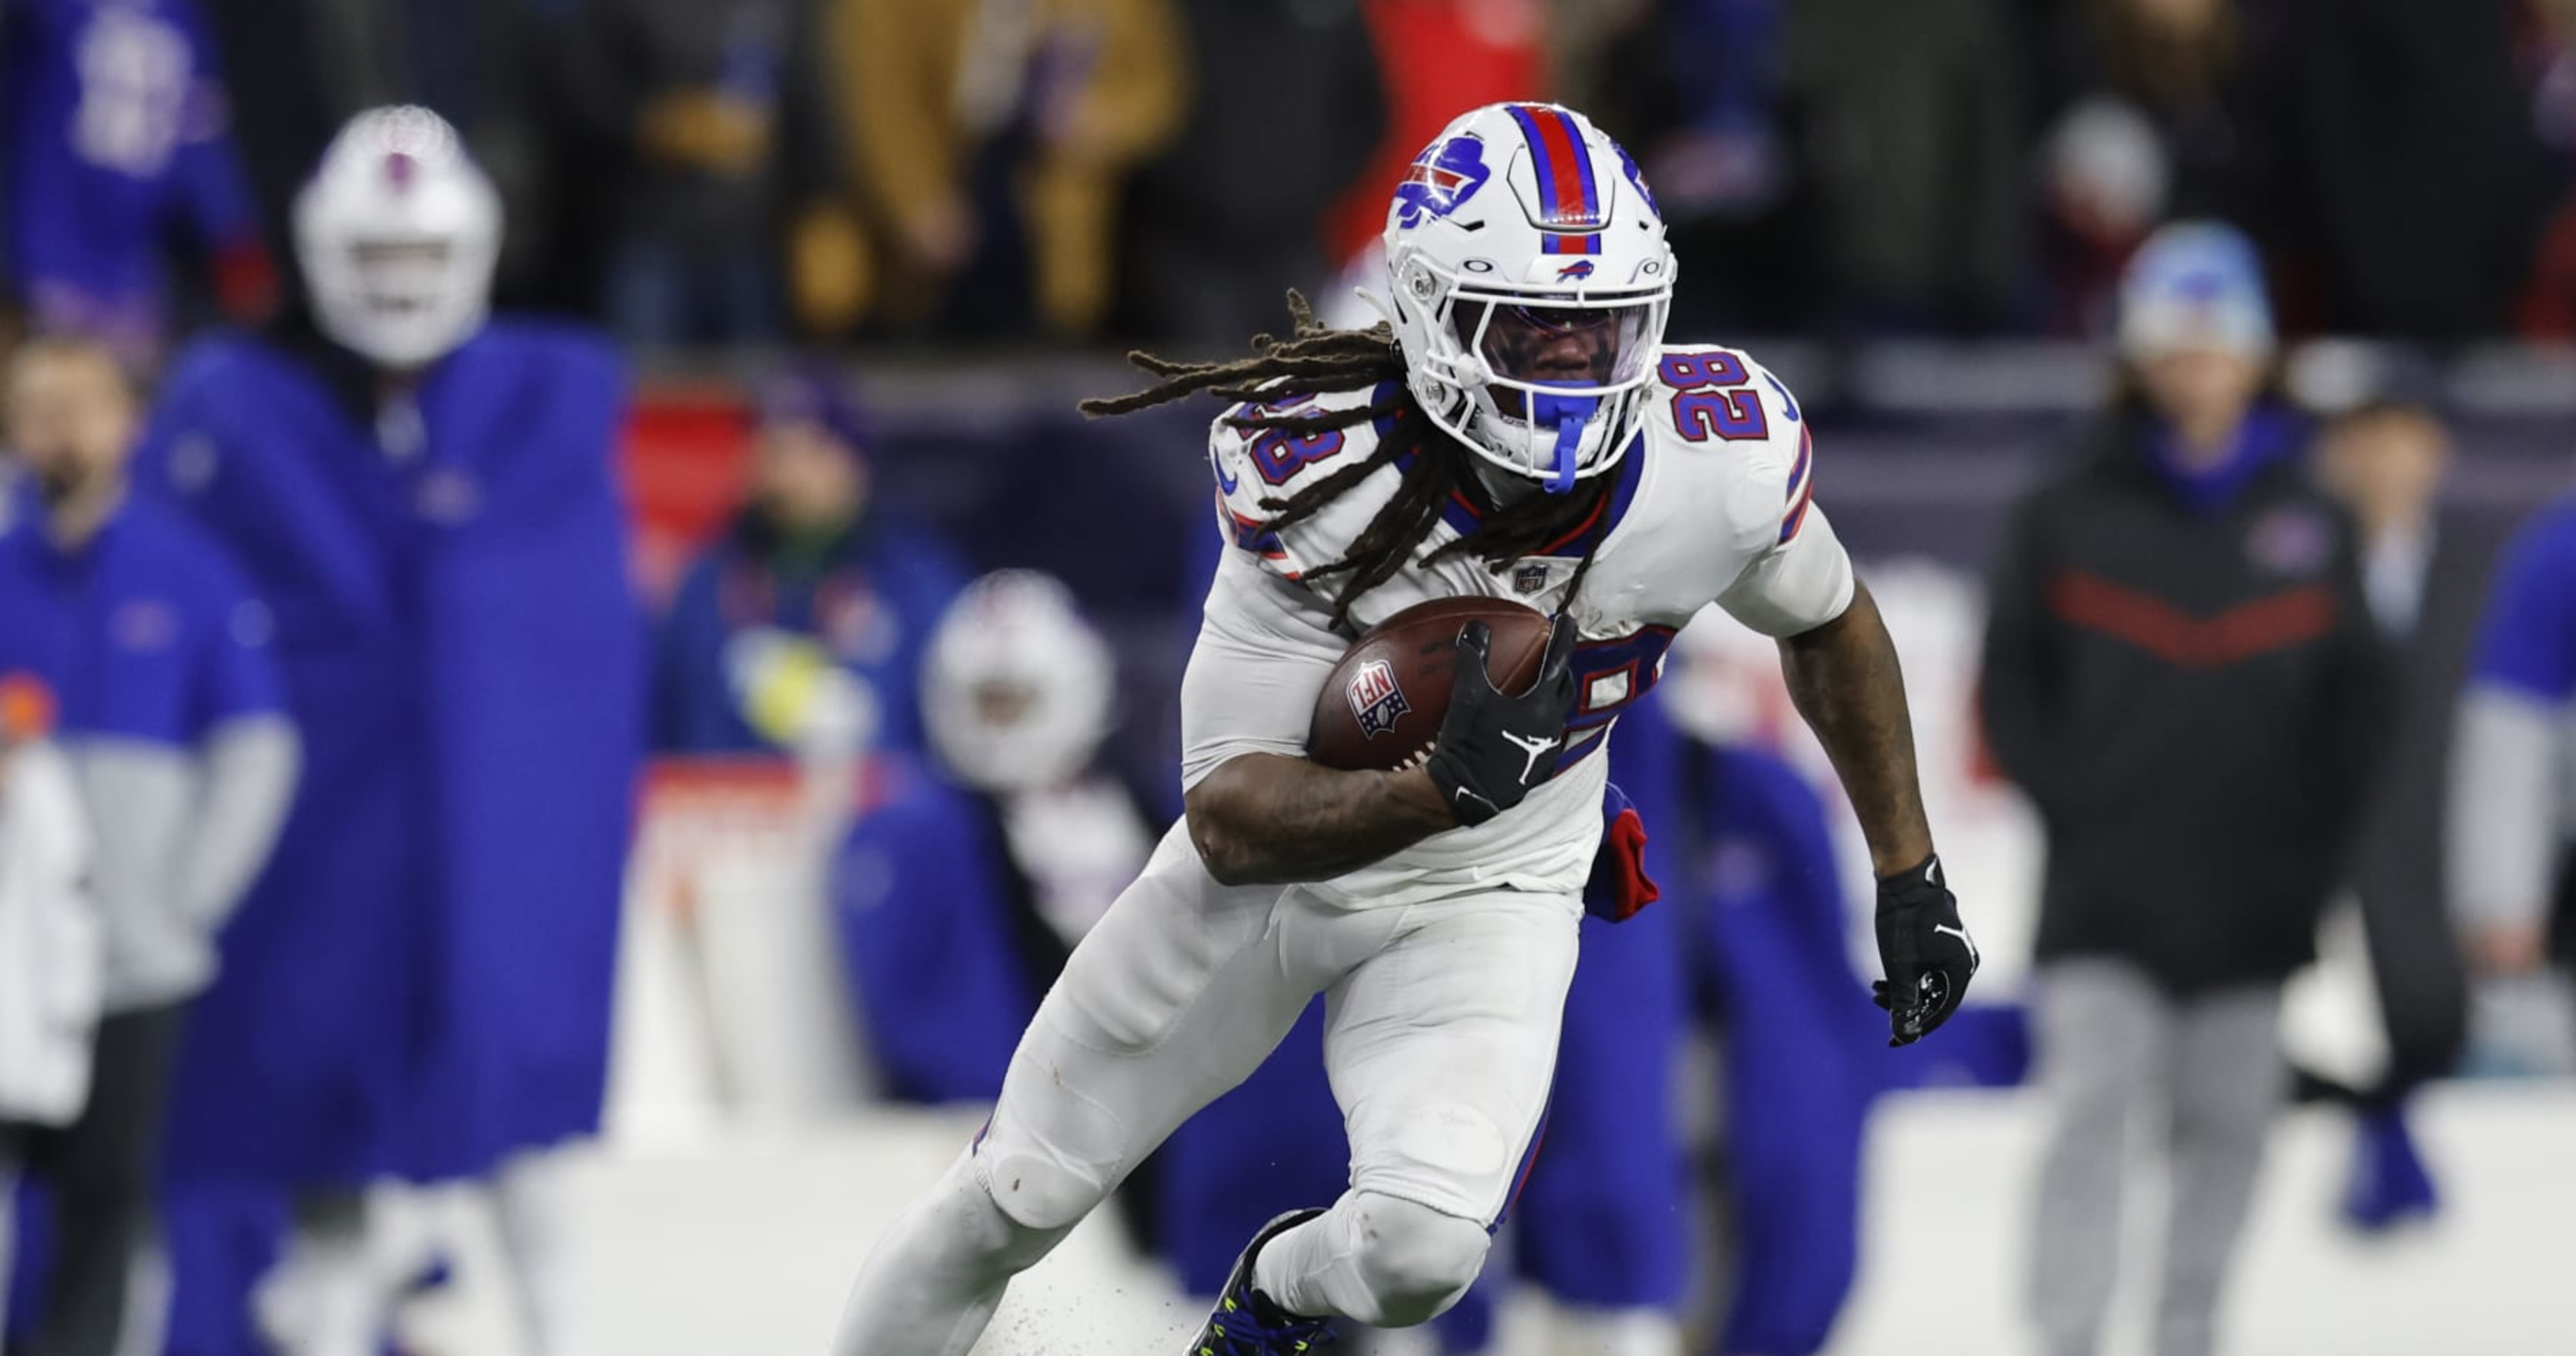 NFL Fantasy Football 2022: Week 14 Waiver Wire pickups, adds and rankings